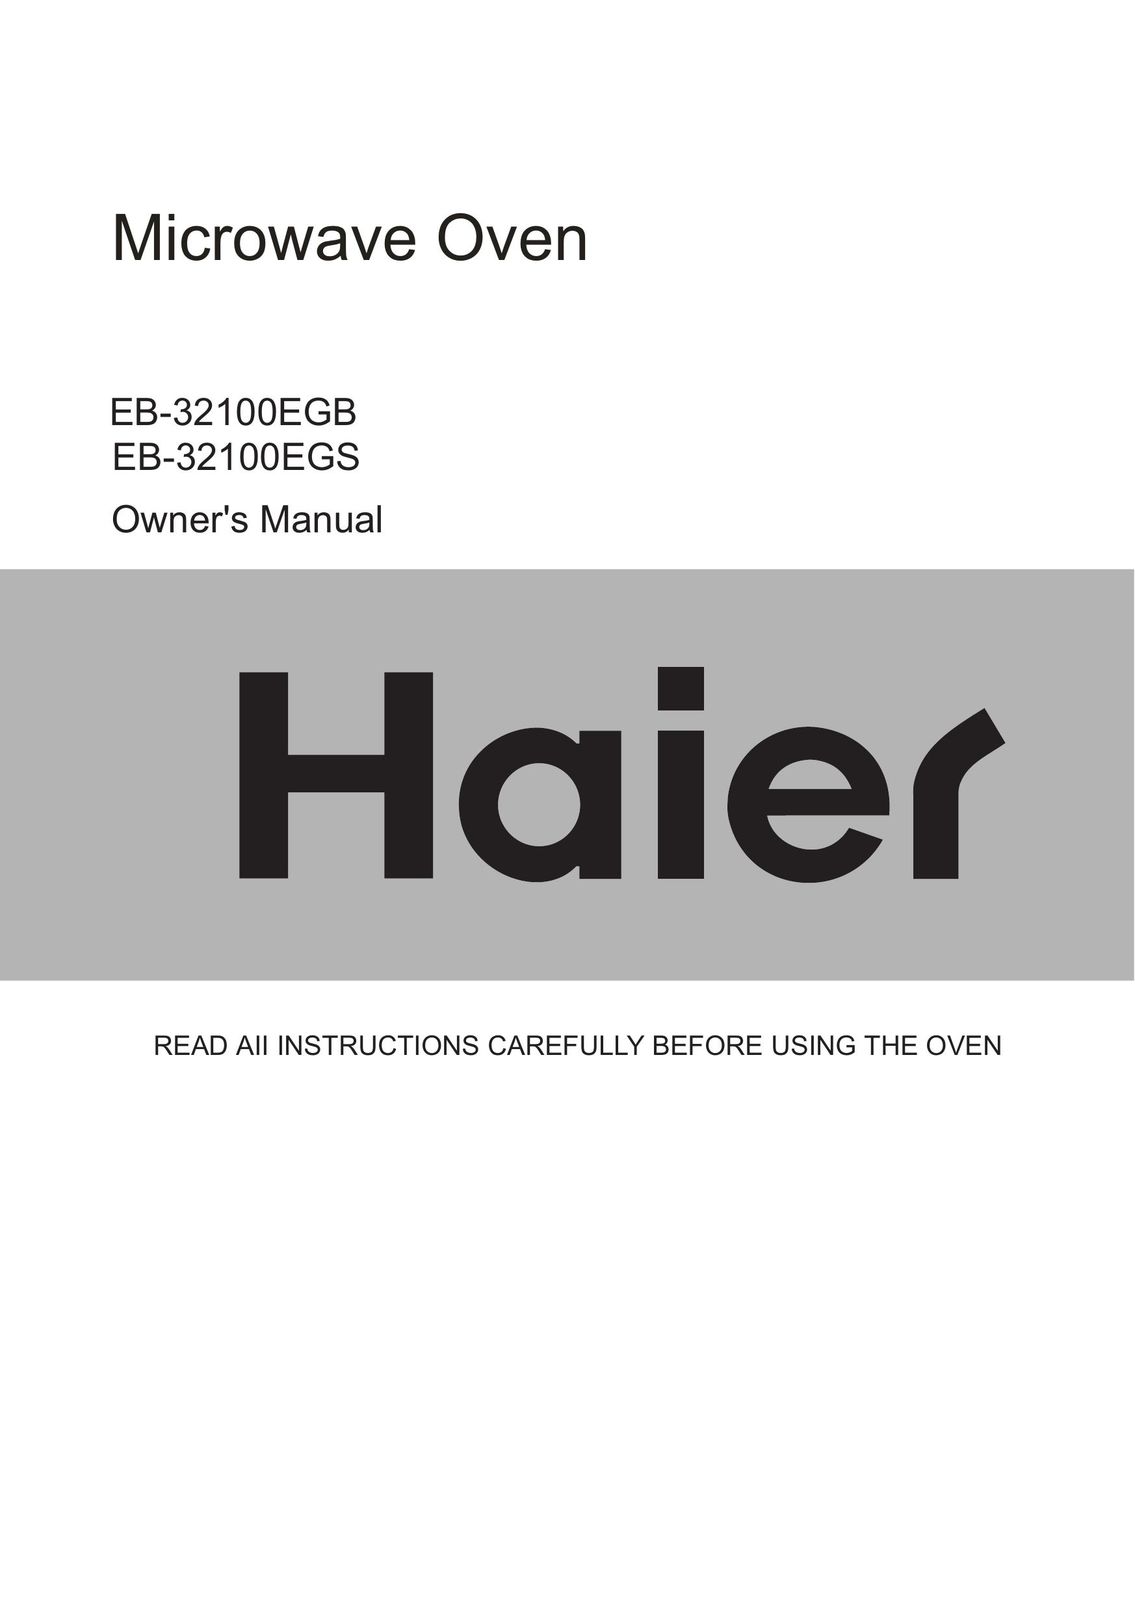 Haier EB-32100EGS Microwave Oven User Manual